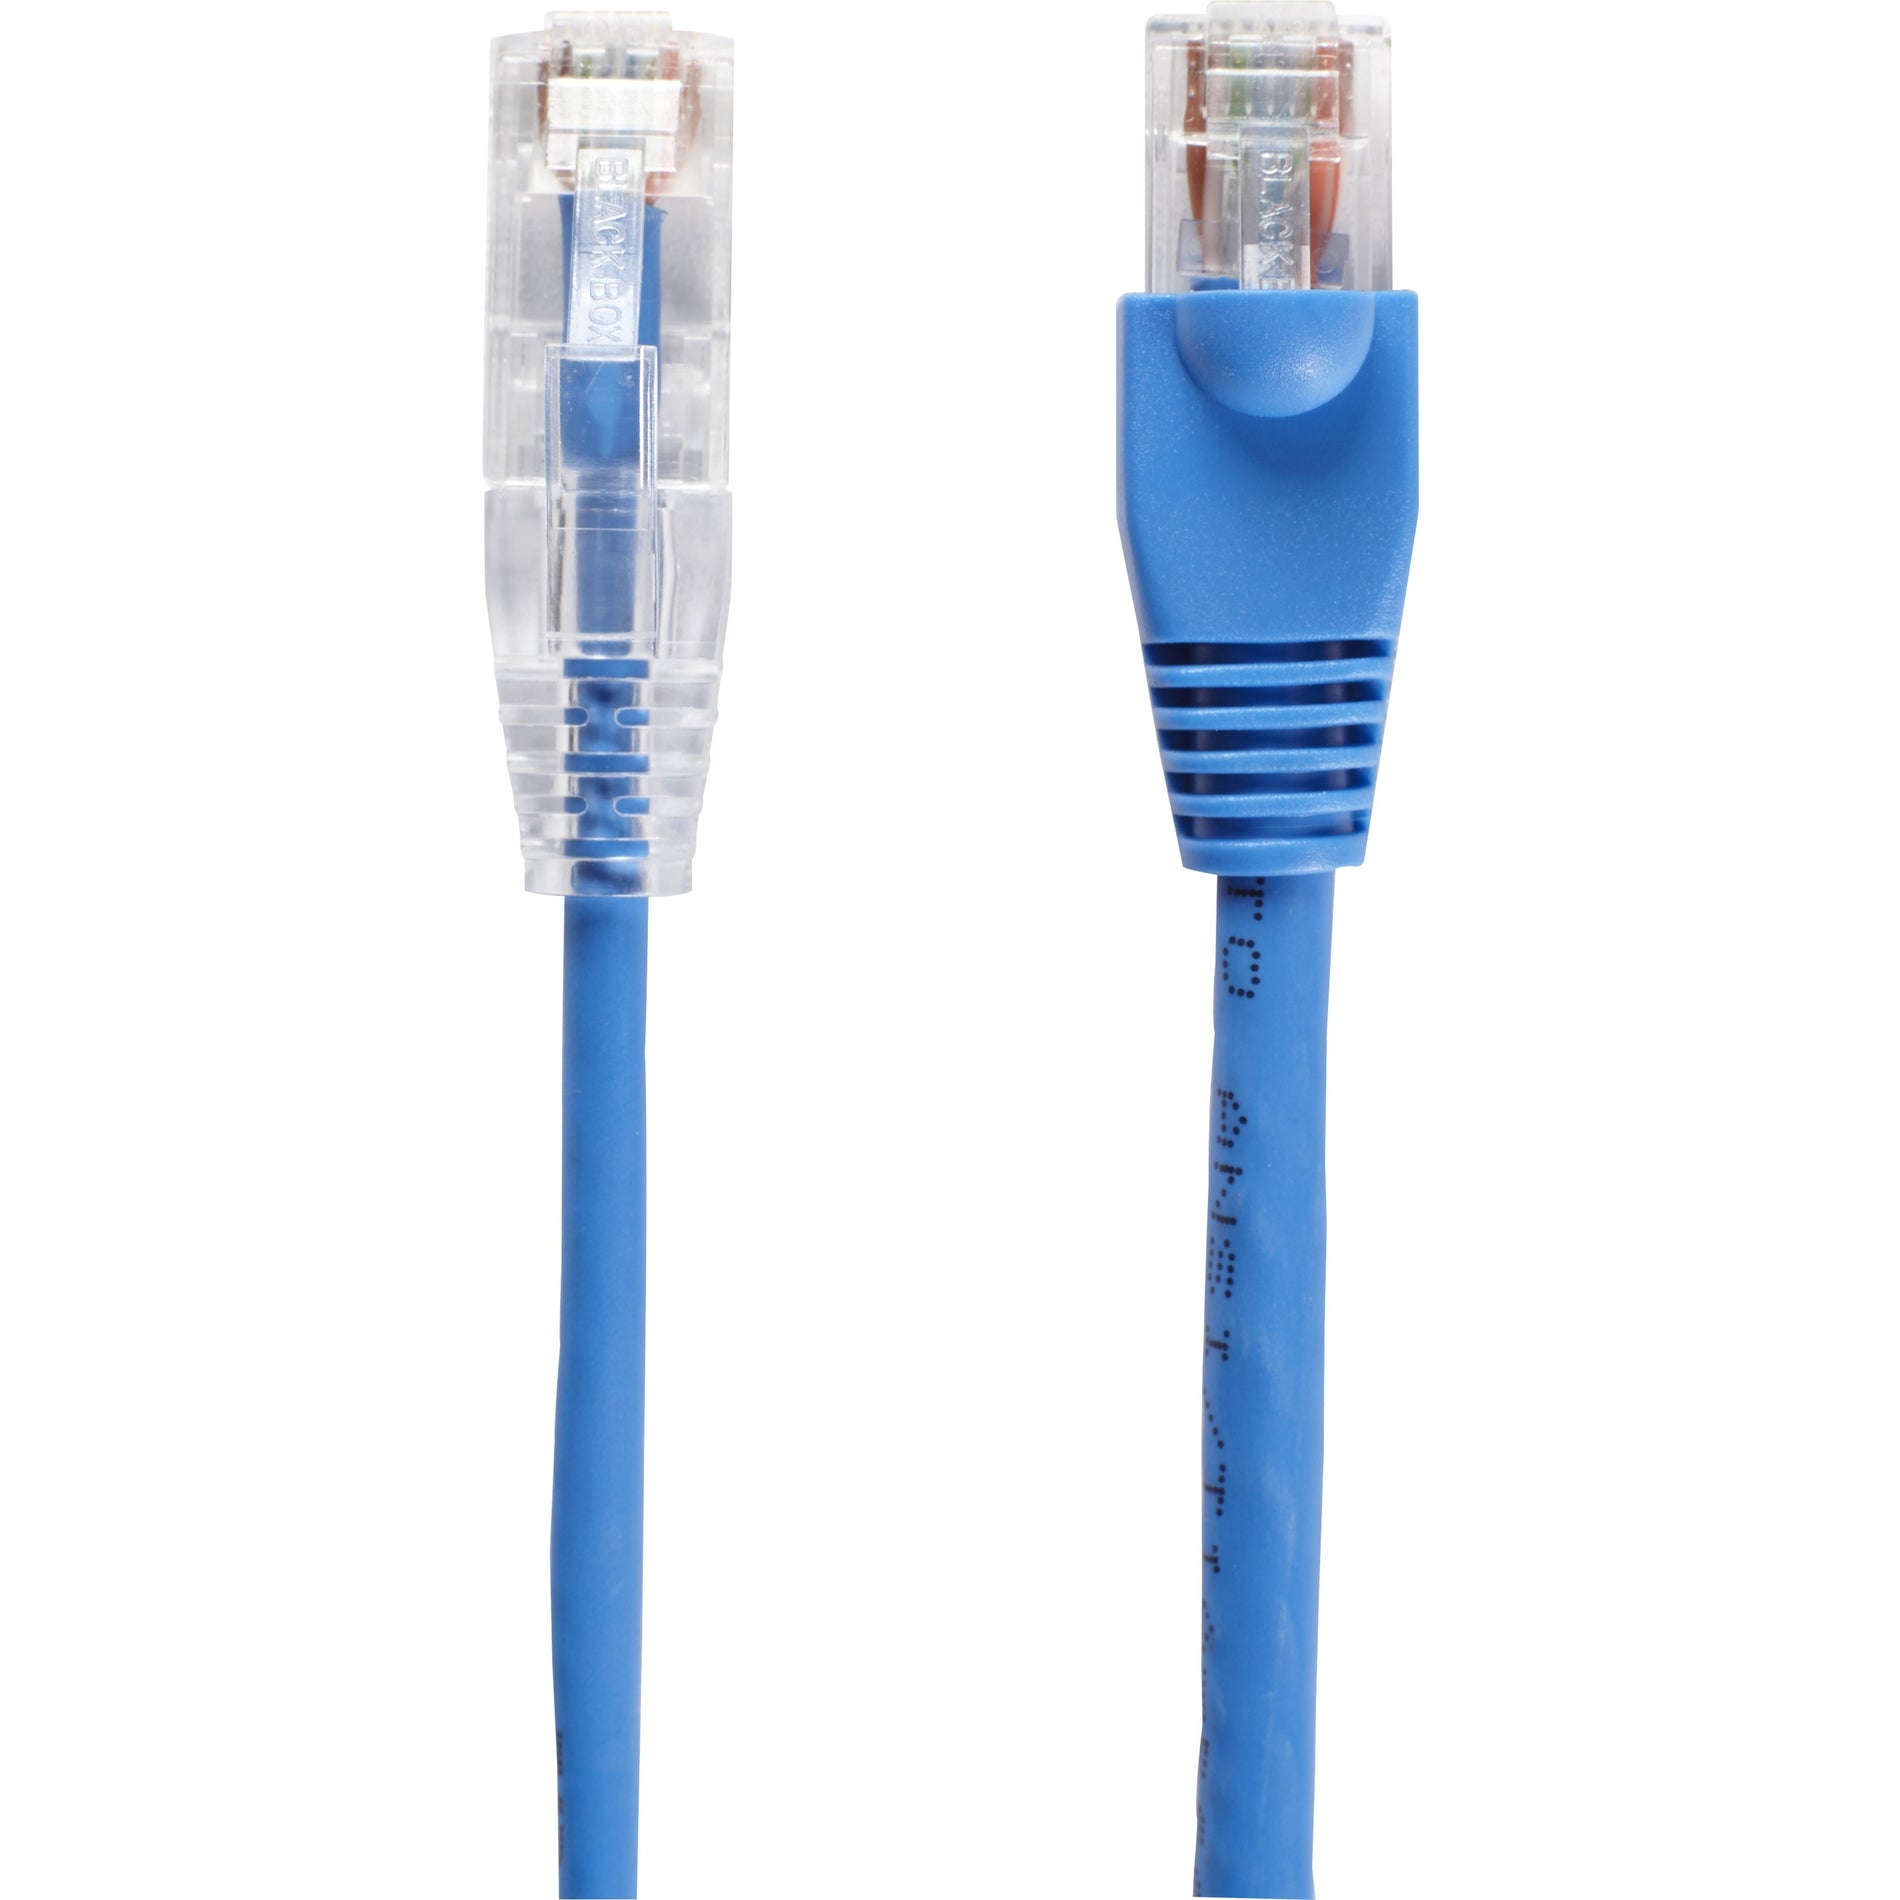 Black Box C6APC28-BL-07 Slim-Net Cat.6a UTP Patch Network Cable, 7 ft, Snagless Boot, 10 Gbit/s Data Transfer Rate